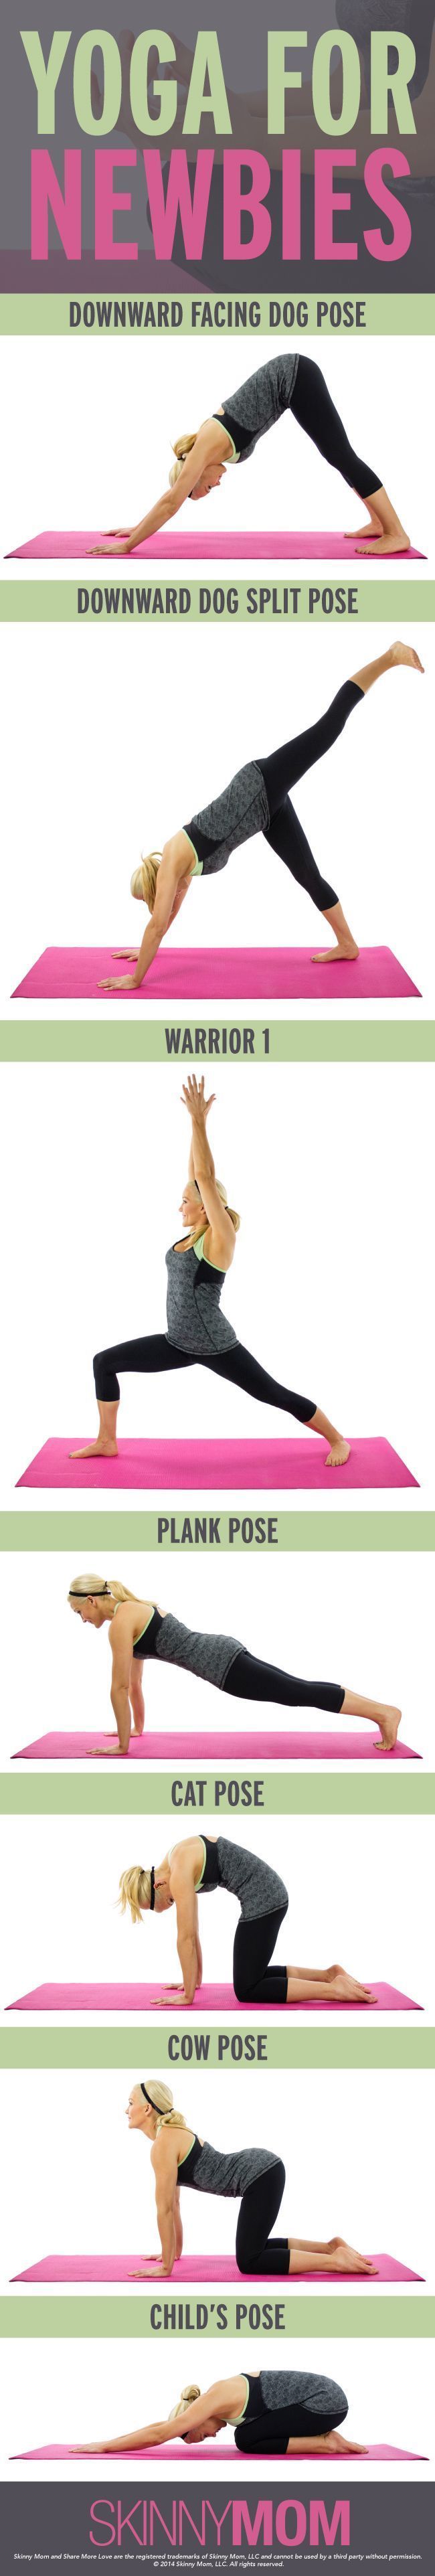 New to yoga? No worries, we have all of the beginner poses just for you!